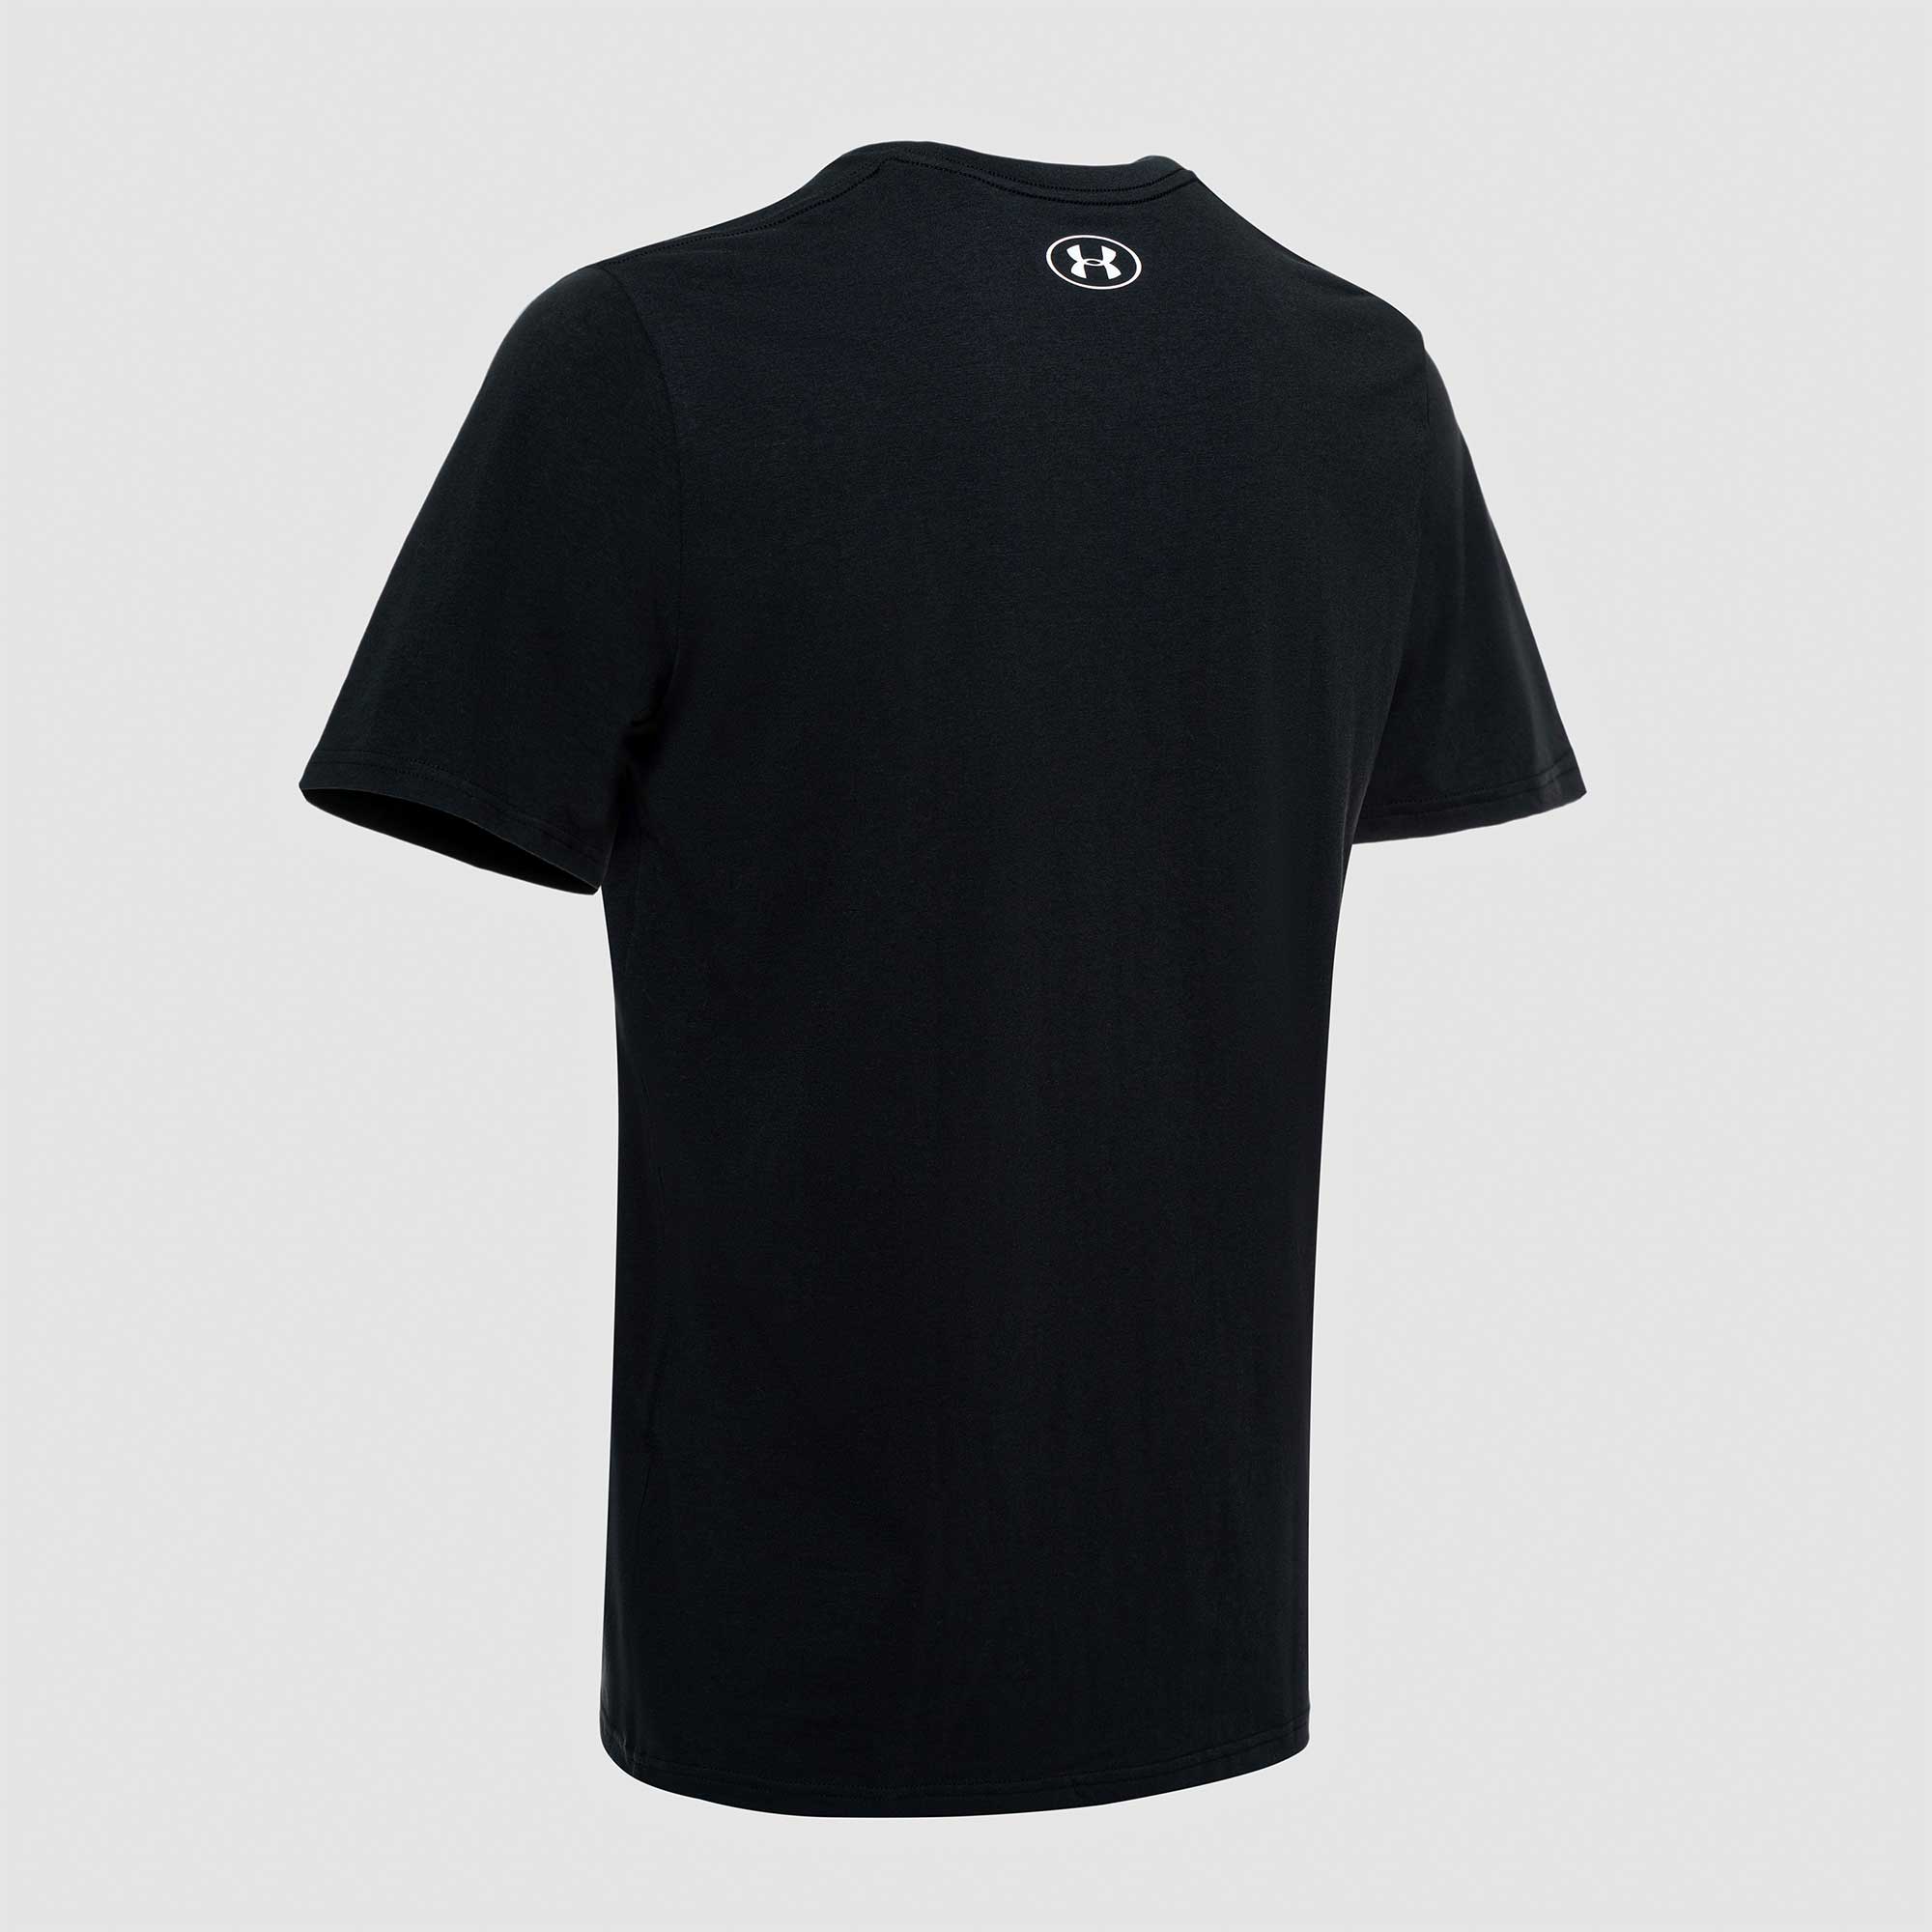 Under-Armour-Tops-02